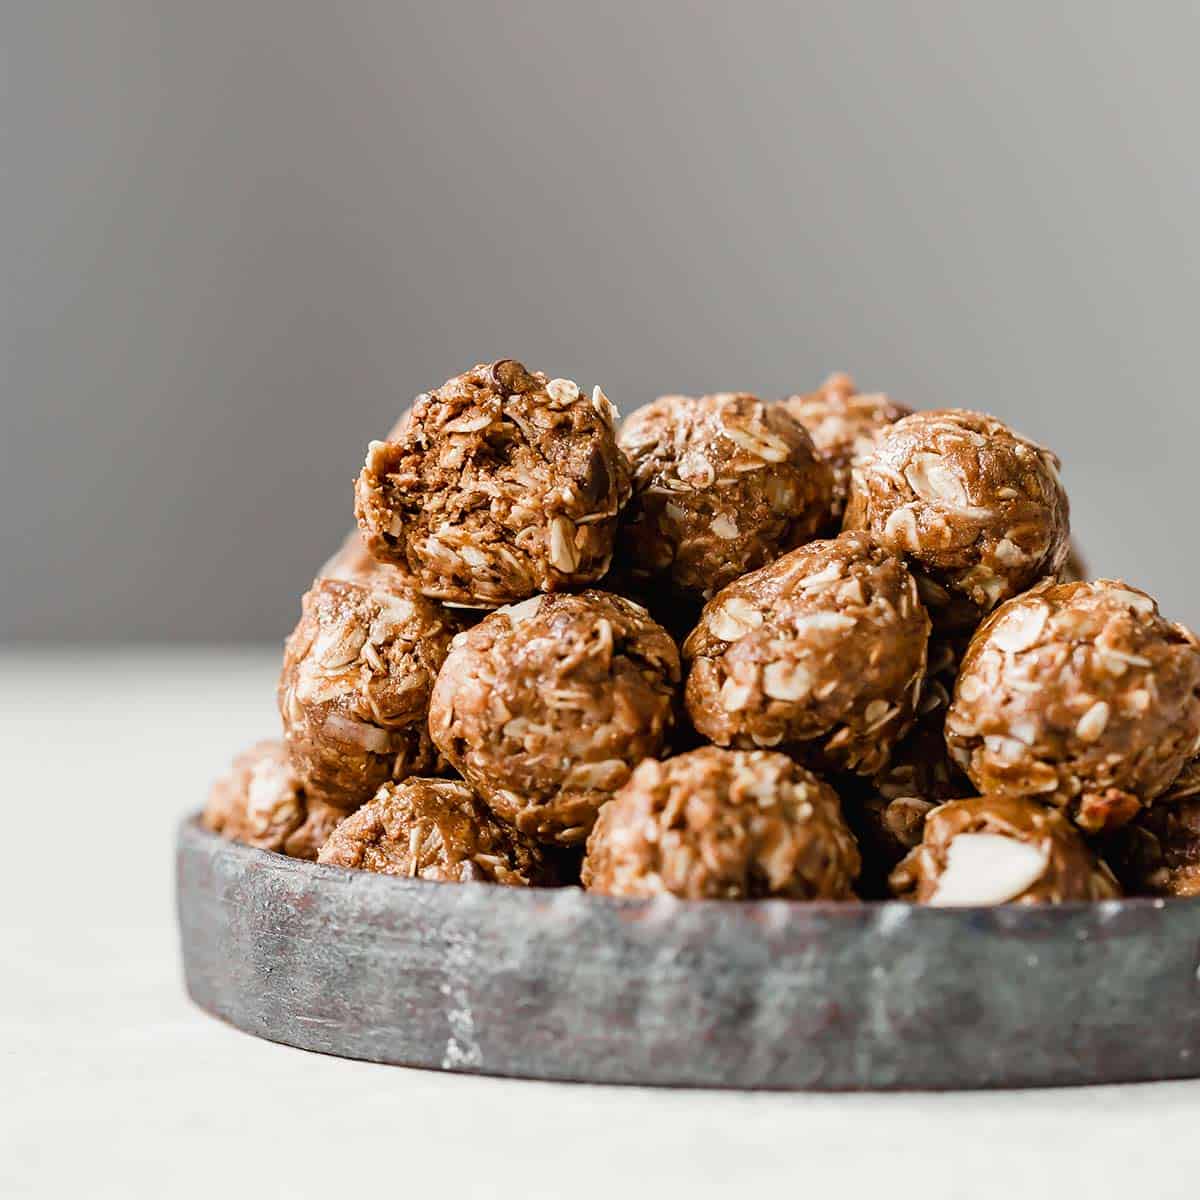 Almond Joy Protein Balls stacked on a round plate.